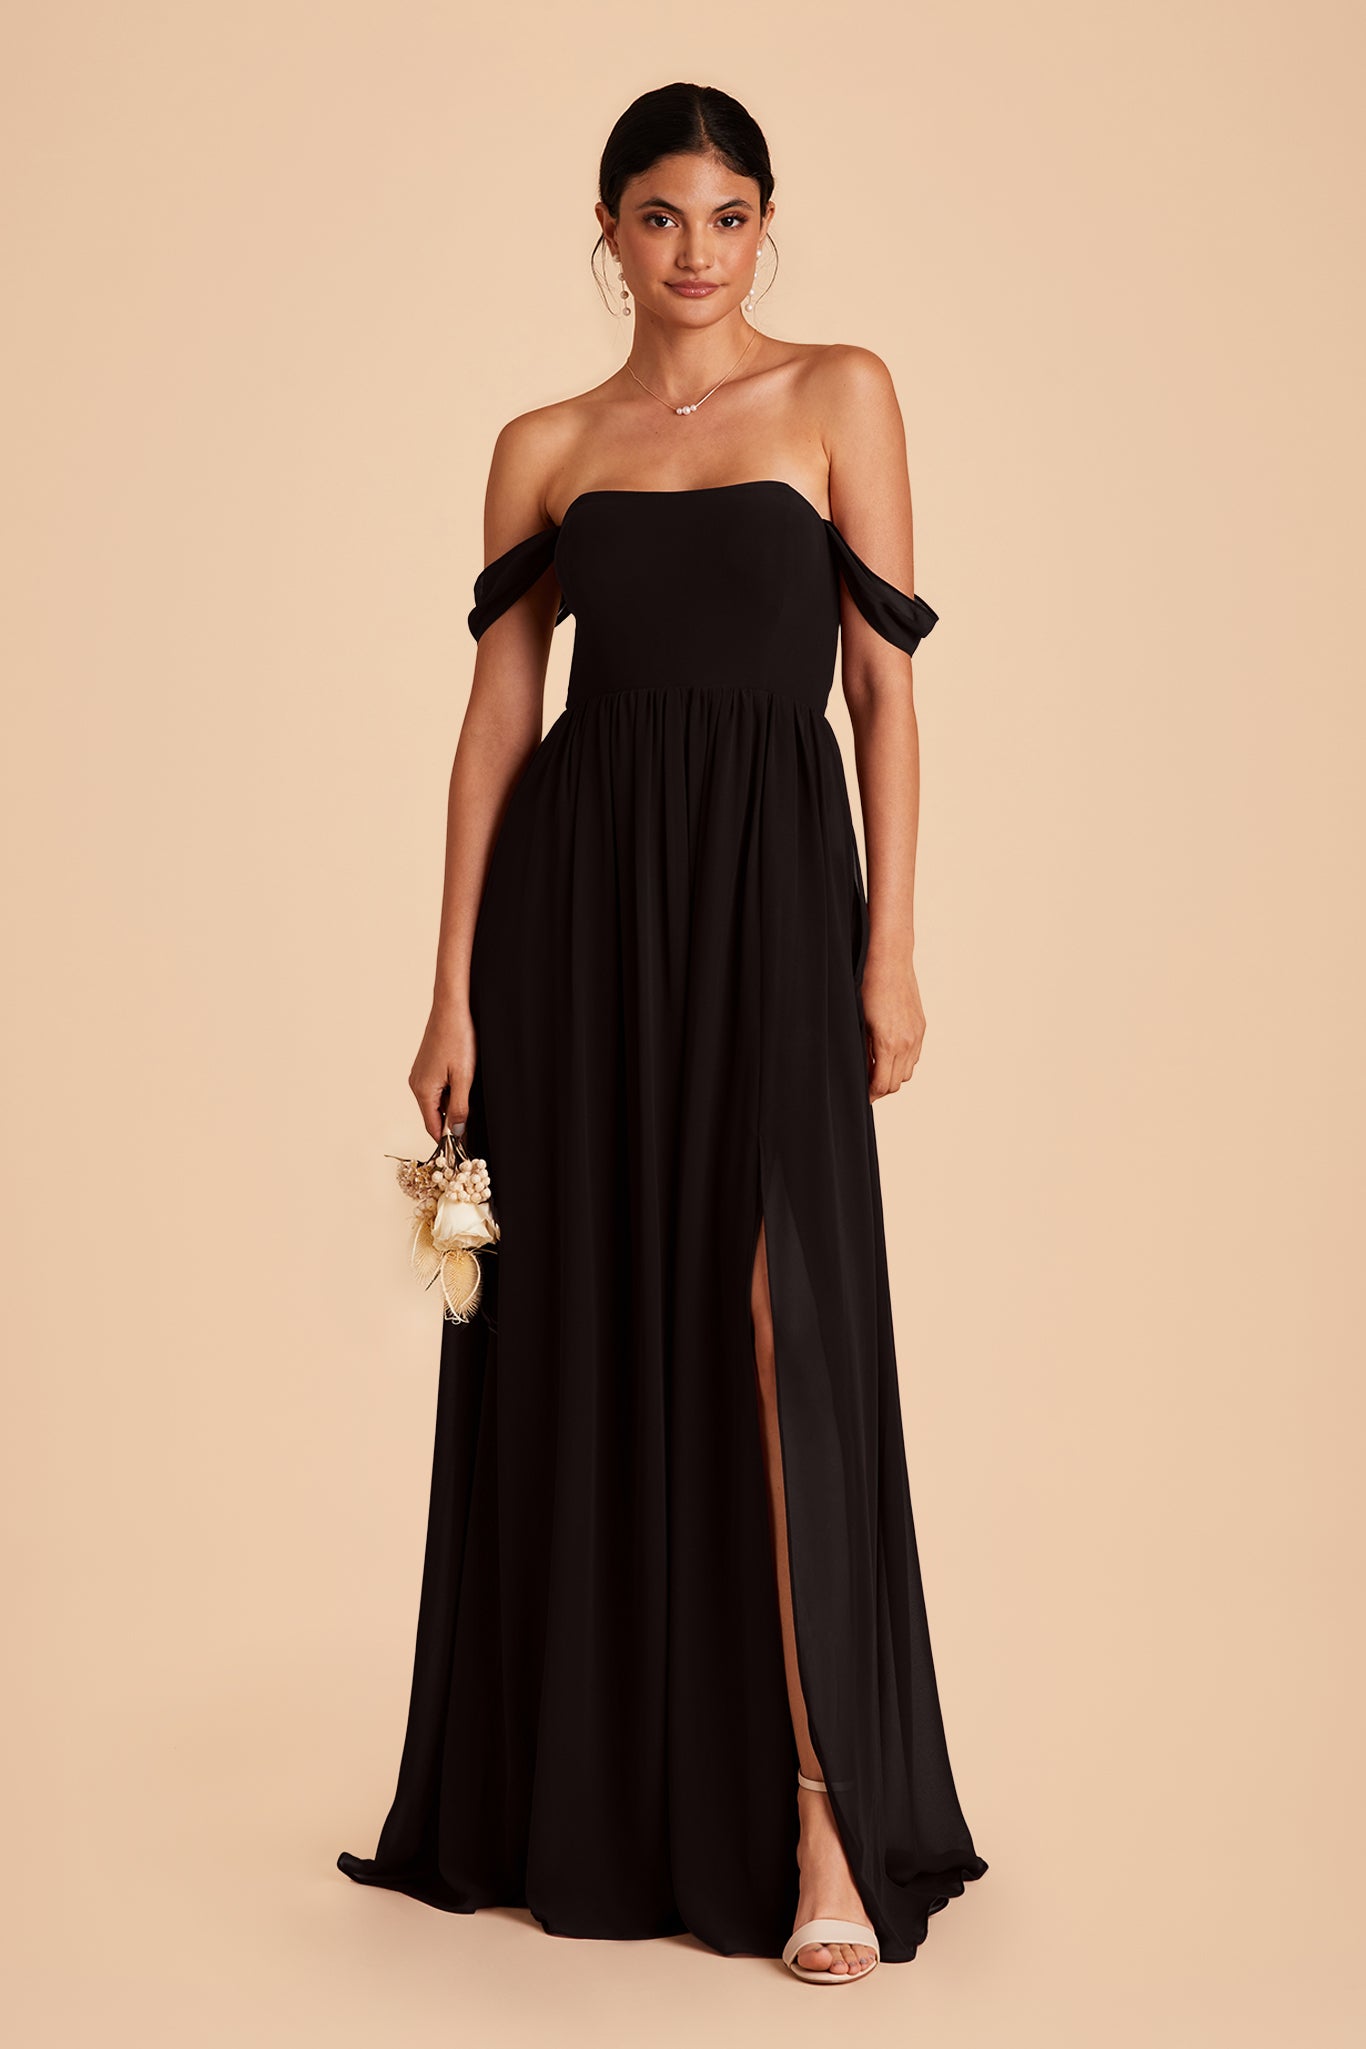 August bridesmaid dress with slit in black chiffon by Birdy Grey, front view